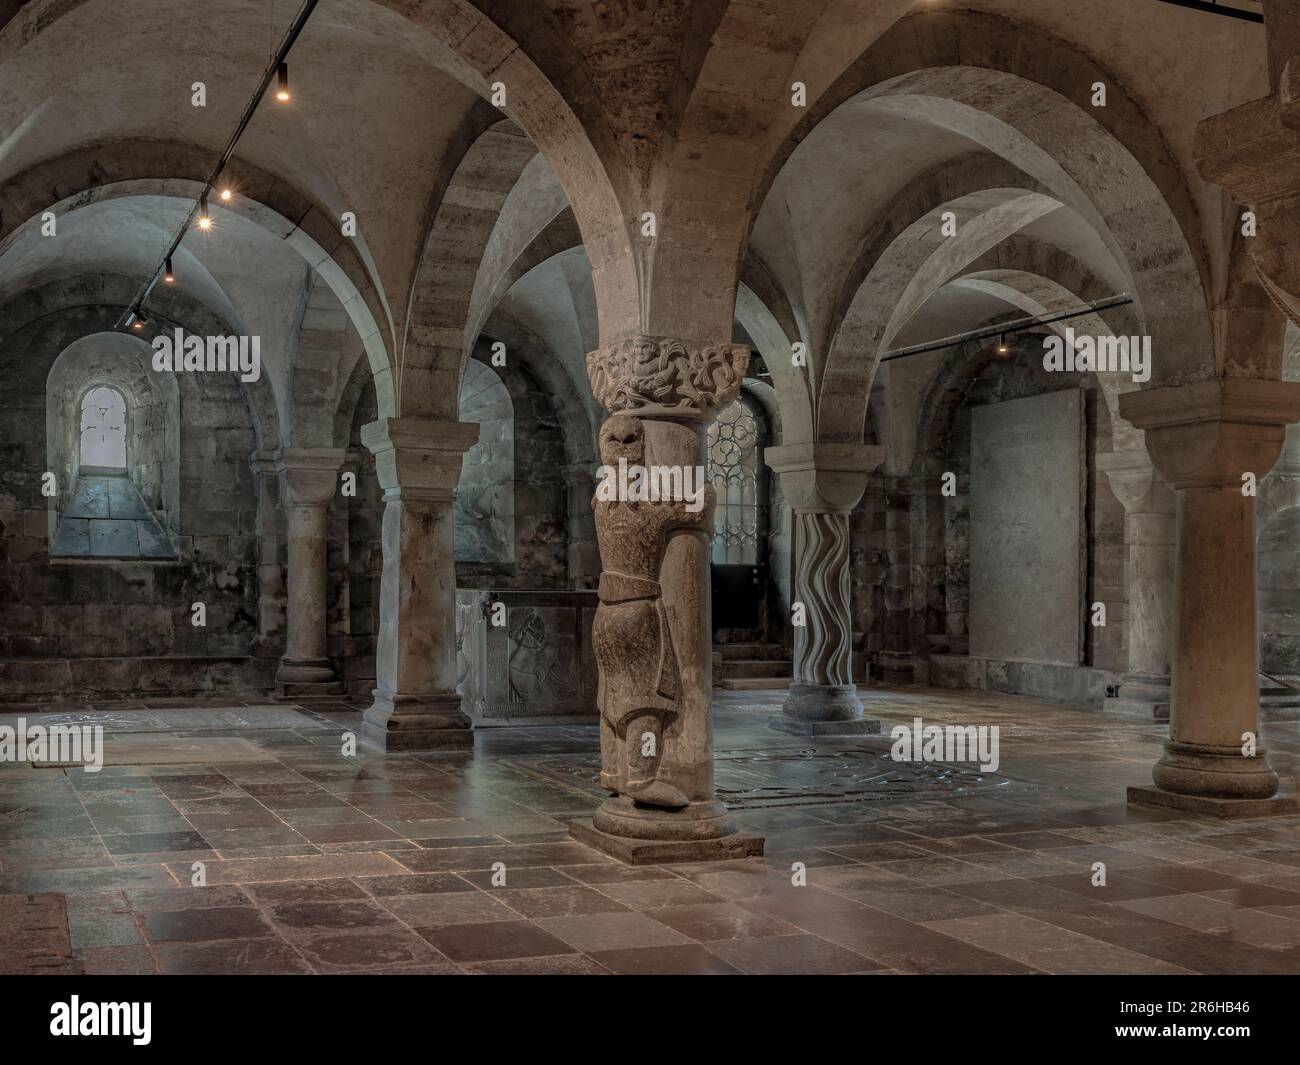 Finn the giant embraces a pillar in the crypt of Lund Cathedral, May 22, 2023 Stock Photo